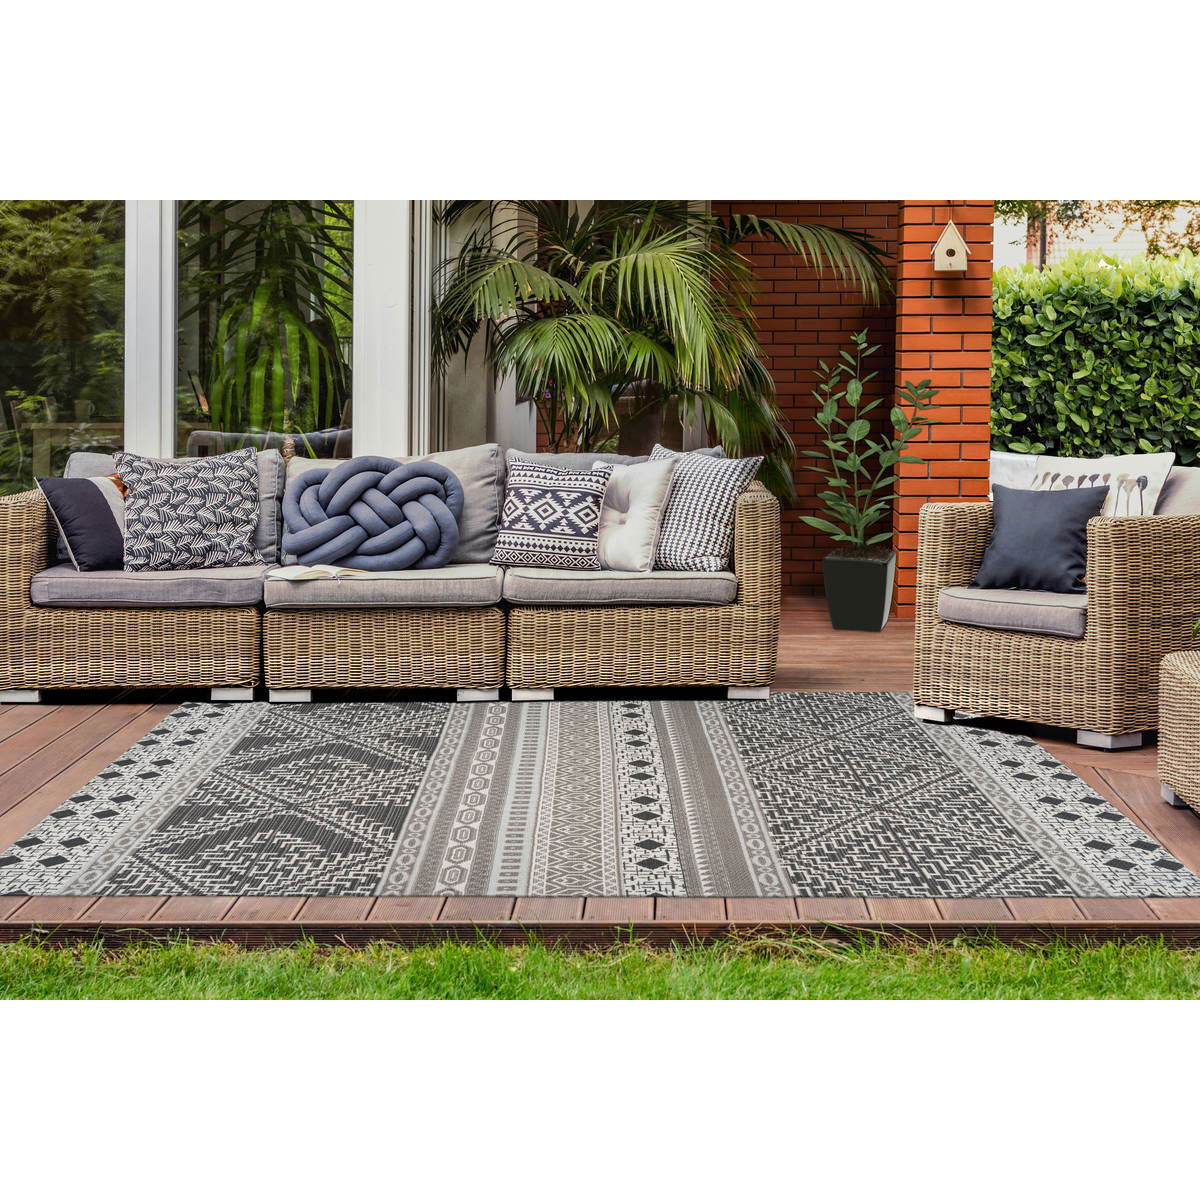 Outdoor-Teppich „Yoga 200“, | | 80x150 taupe/creme K000035461